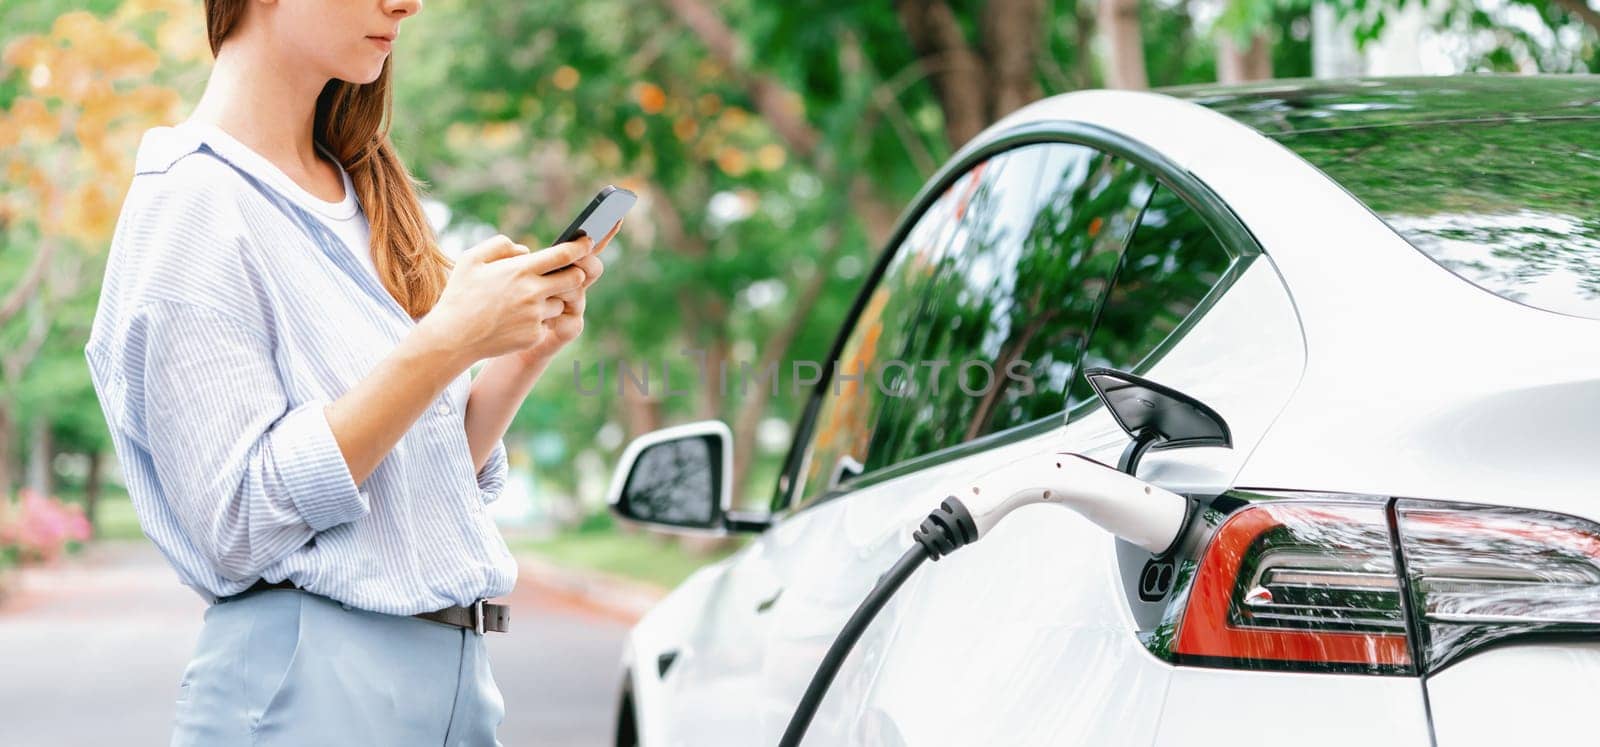 Panorama banner woman use smartphone online banking application to pay for EV car battery charging from EV charging station during autumn vacation holiday trip at national park or forest. Exalt